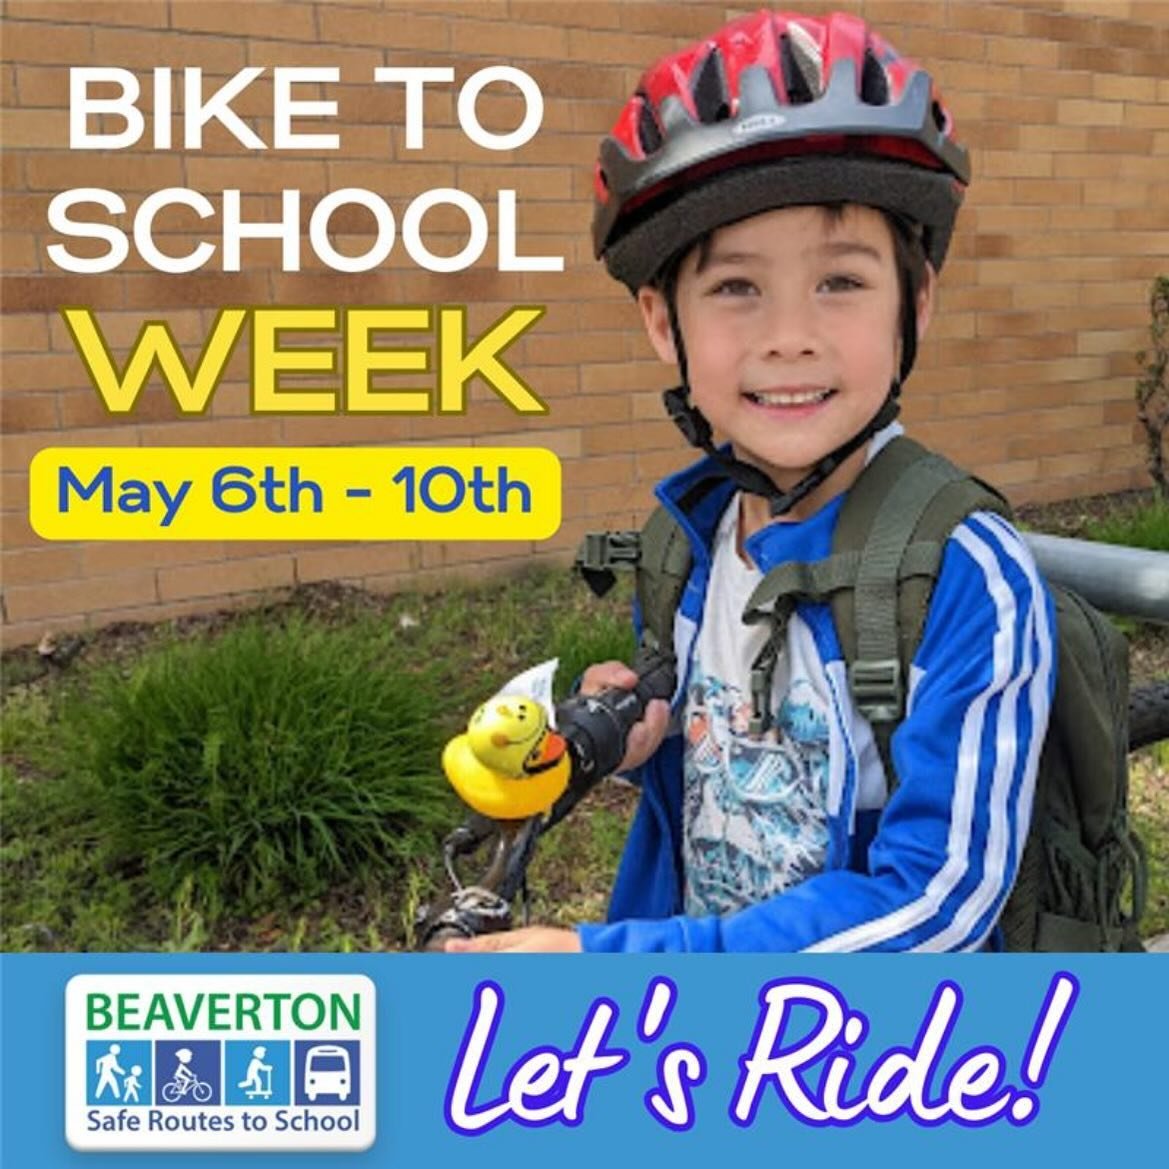 Bike or roll to school this week!

Our BIKE RODEO complete with some kids getting free bikes and helmet and swag will be the following week on May 13: Bike Rodeo from 8:00 - 11:30am! Students will learn bike safety skills!